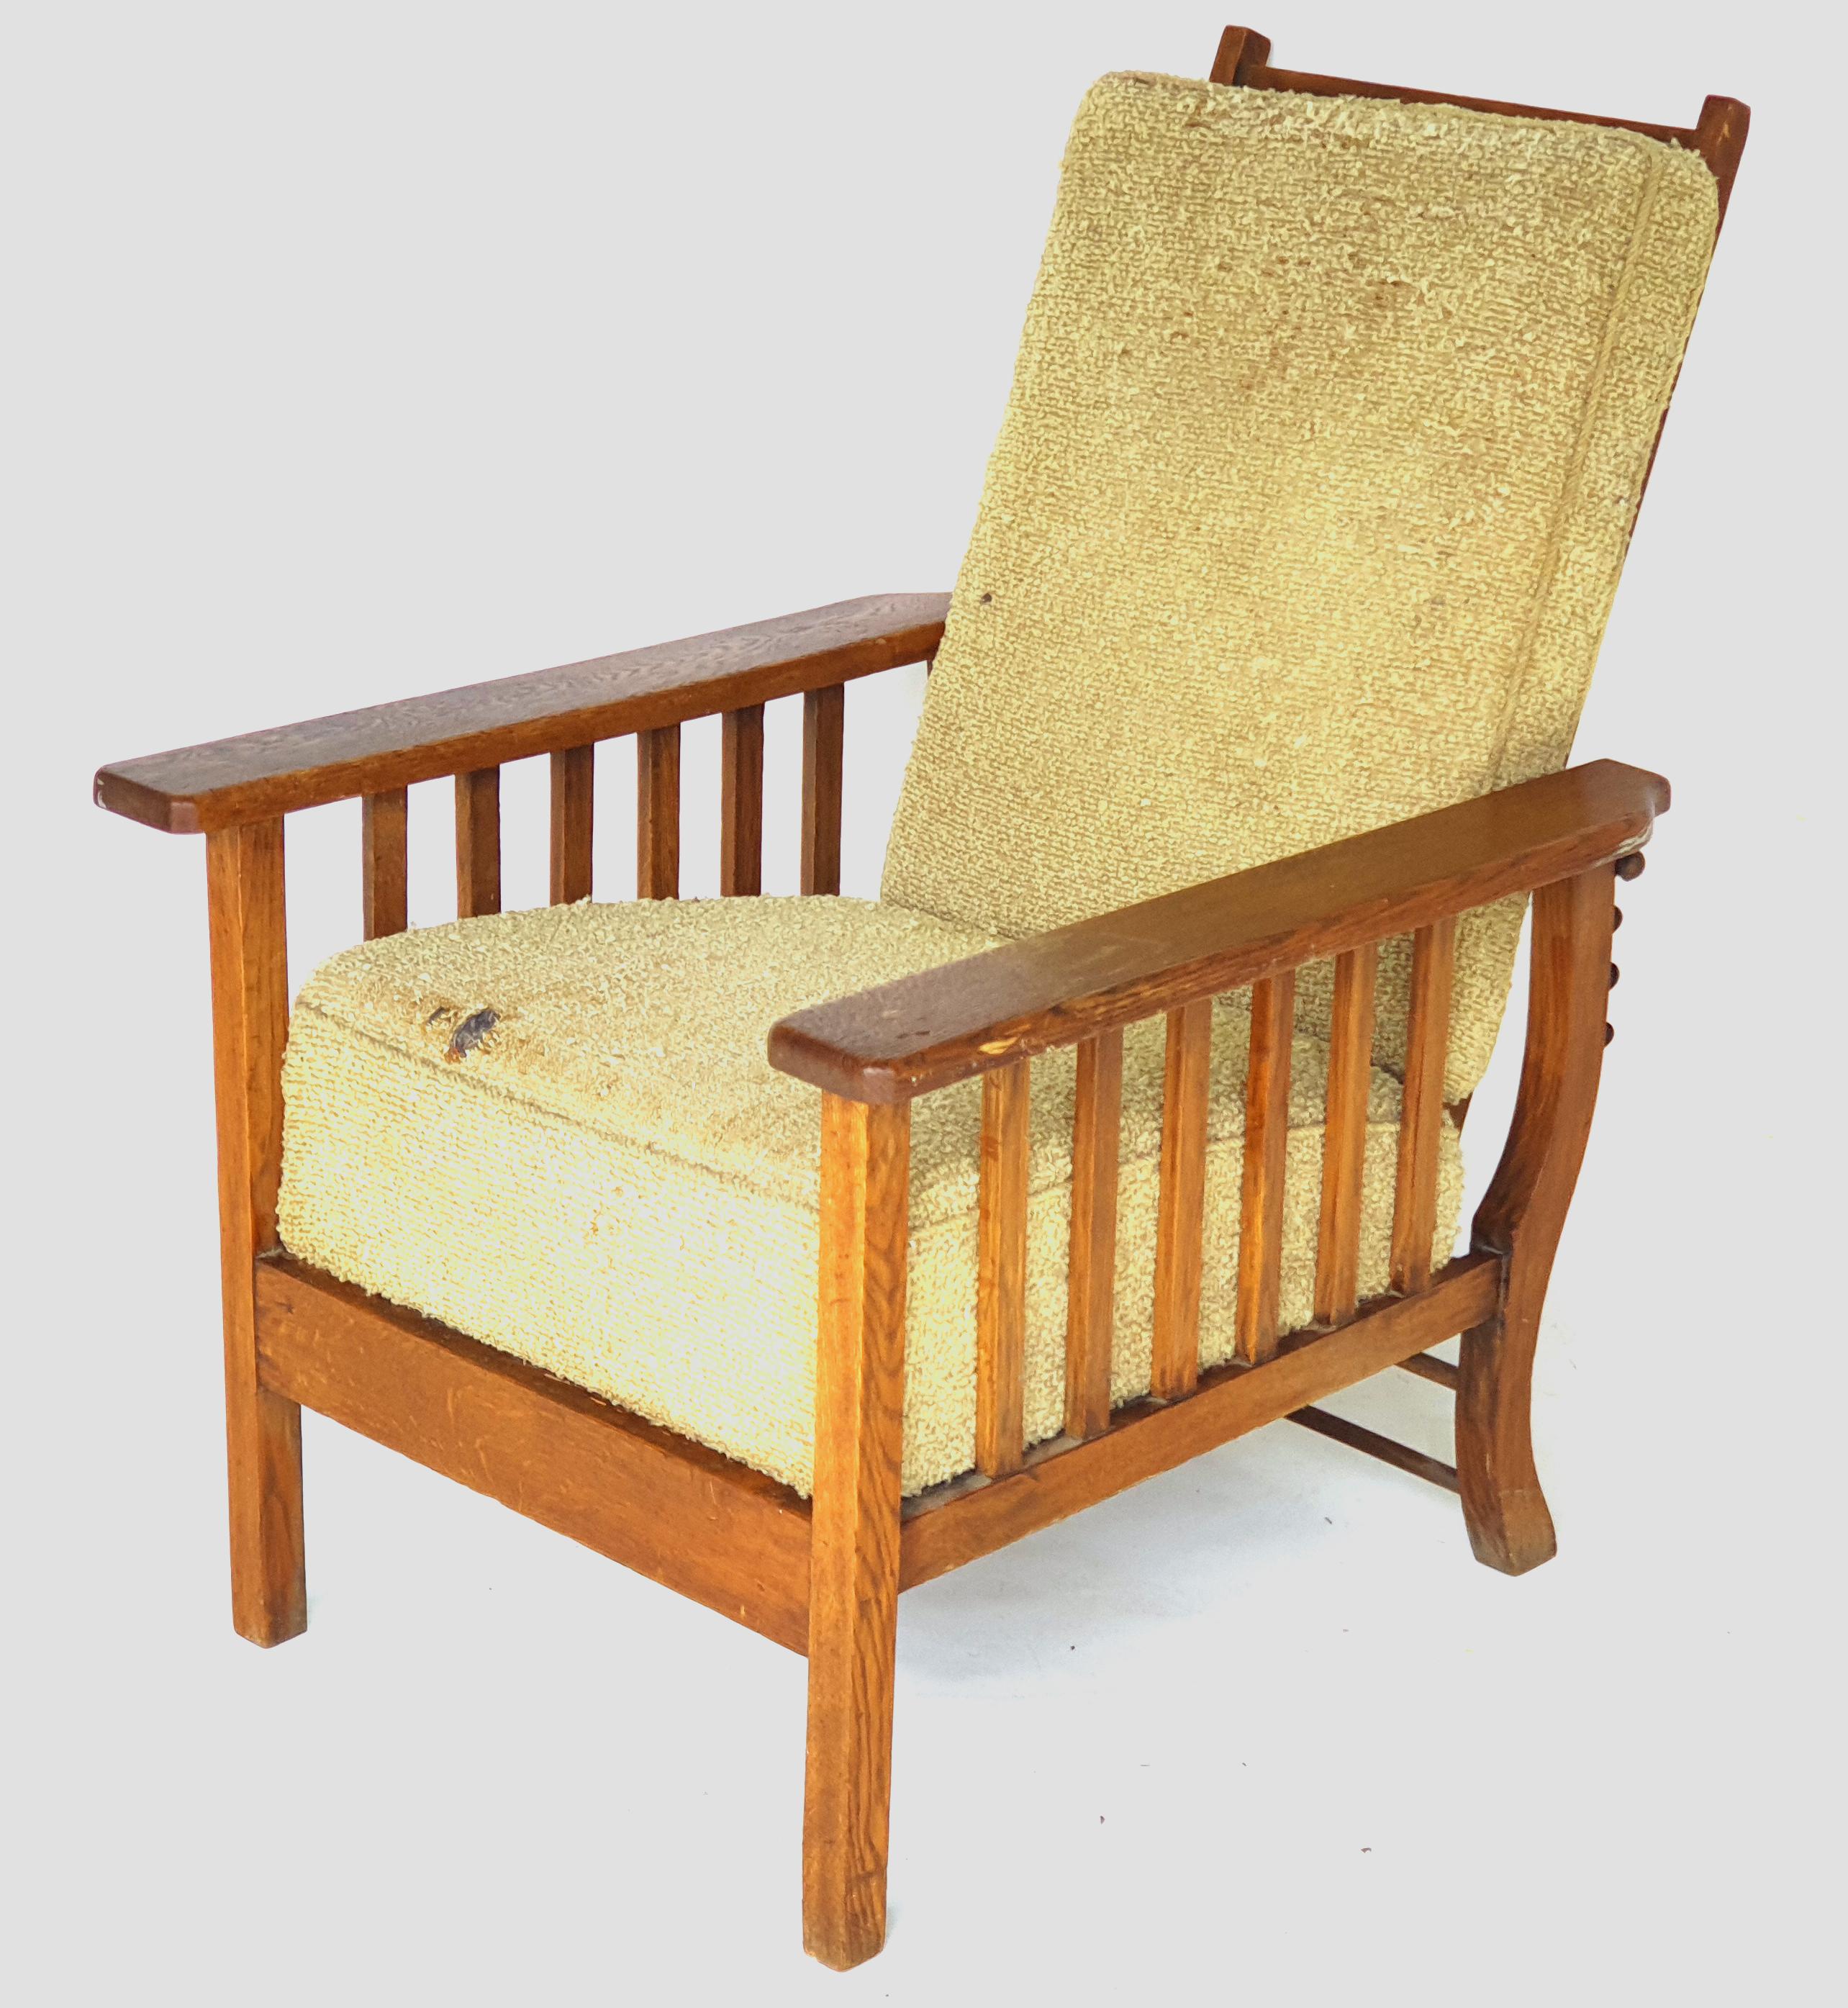 Attributed to Richard Riemerschmid - Art Nouveau armchair, 1910s. Made of oak.

With fold-down backrest, original condition. 

This armchair is attributed to Richard Riemerschmid (1868-1957), a German architect, art professor and interior